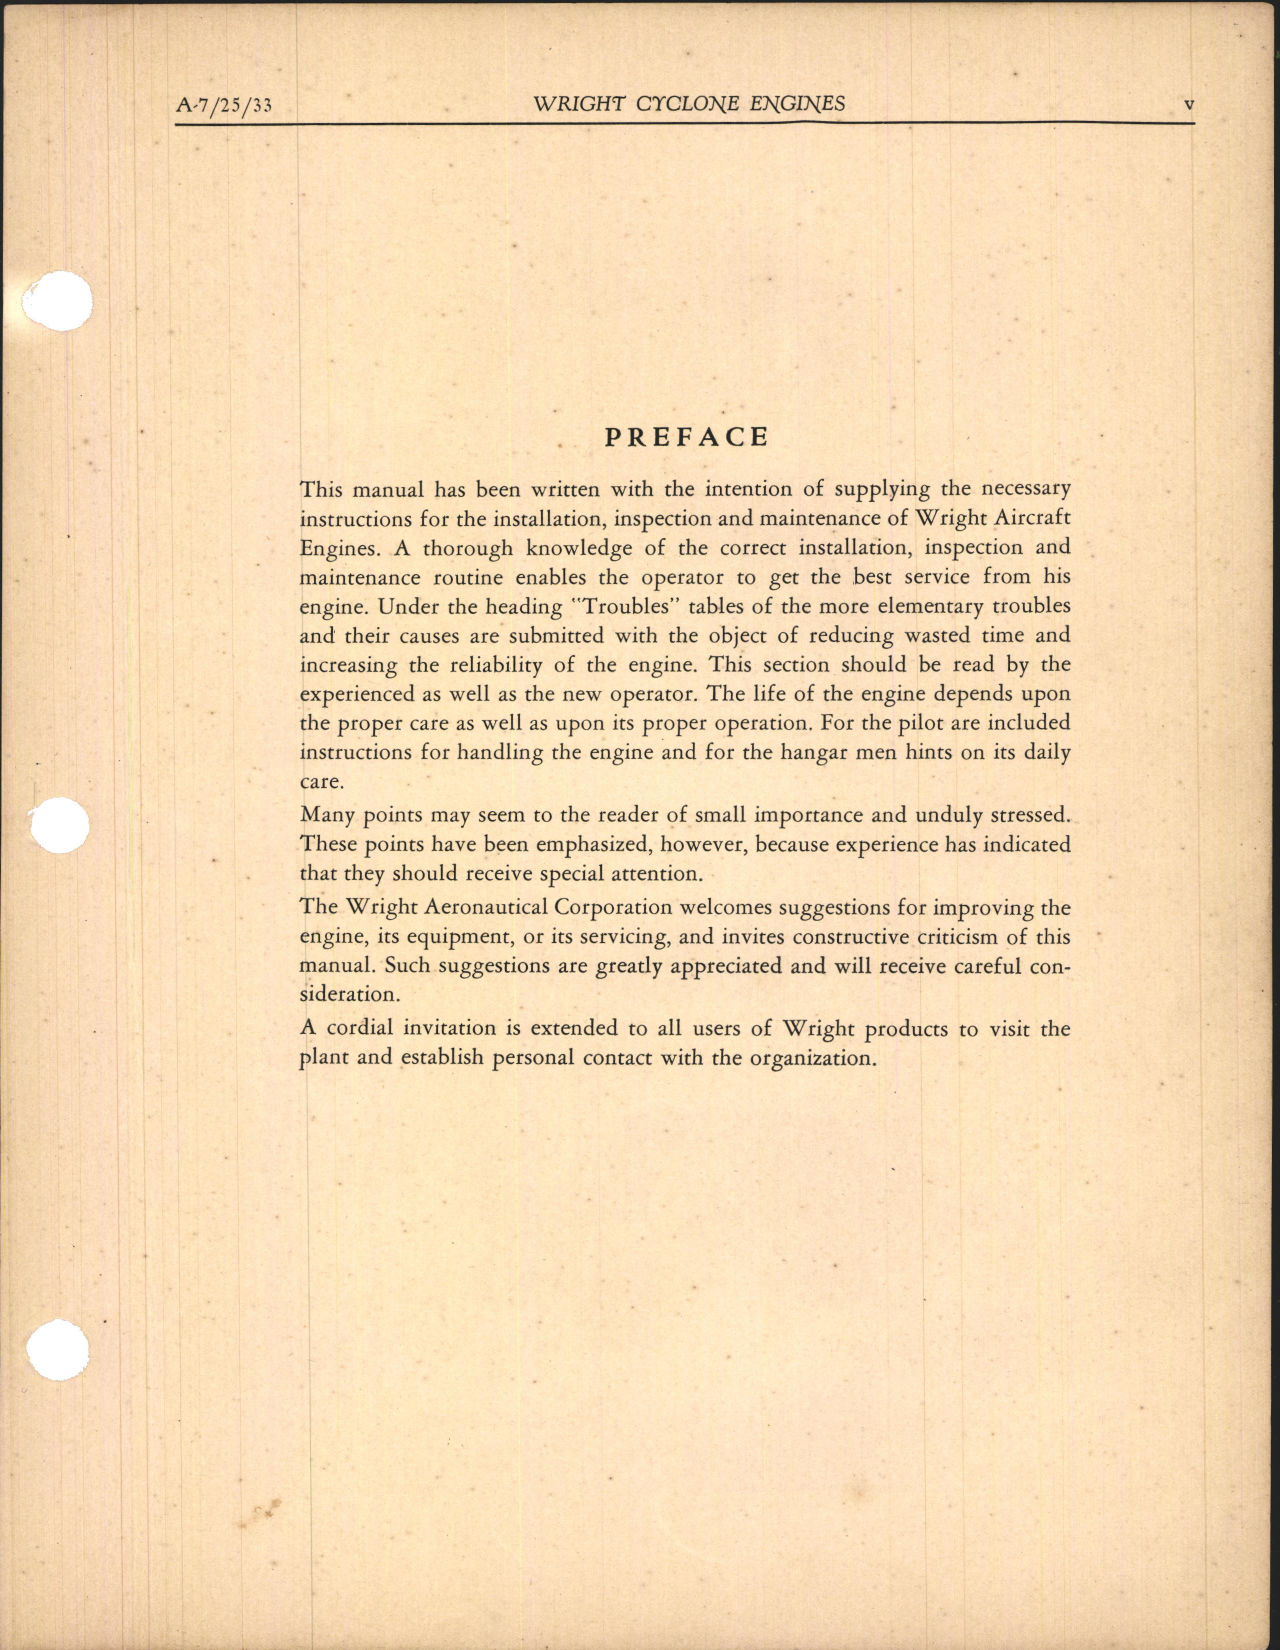 Sample page 5 from AirCorps Library document: Installation, Inspection, and Maintenance of the Wright Cyclone R-1820-F and GR-1820-F